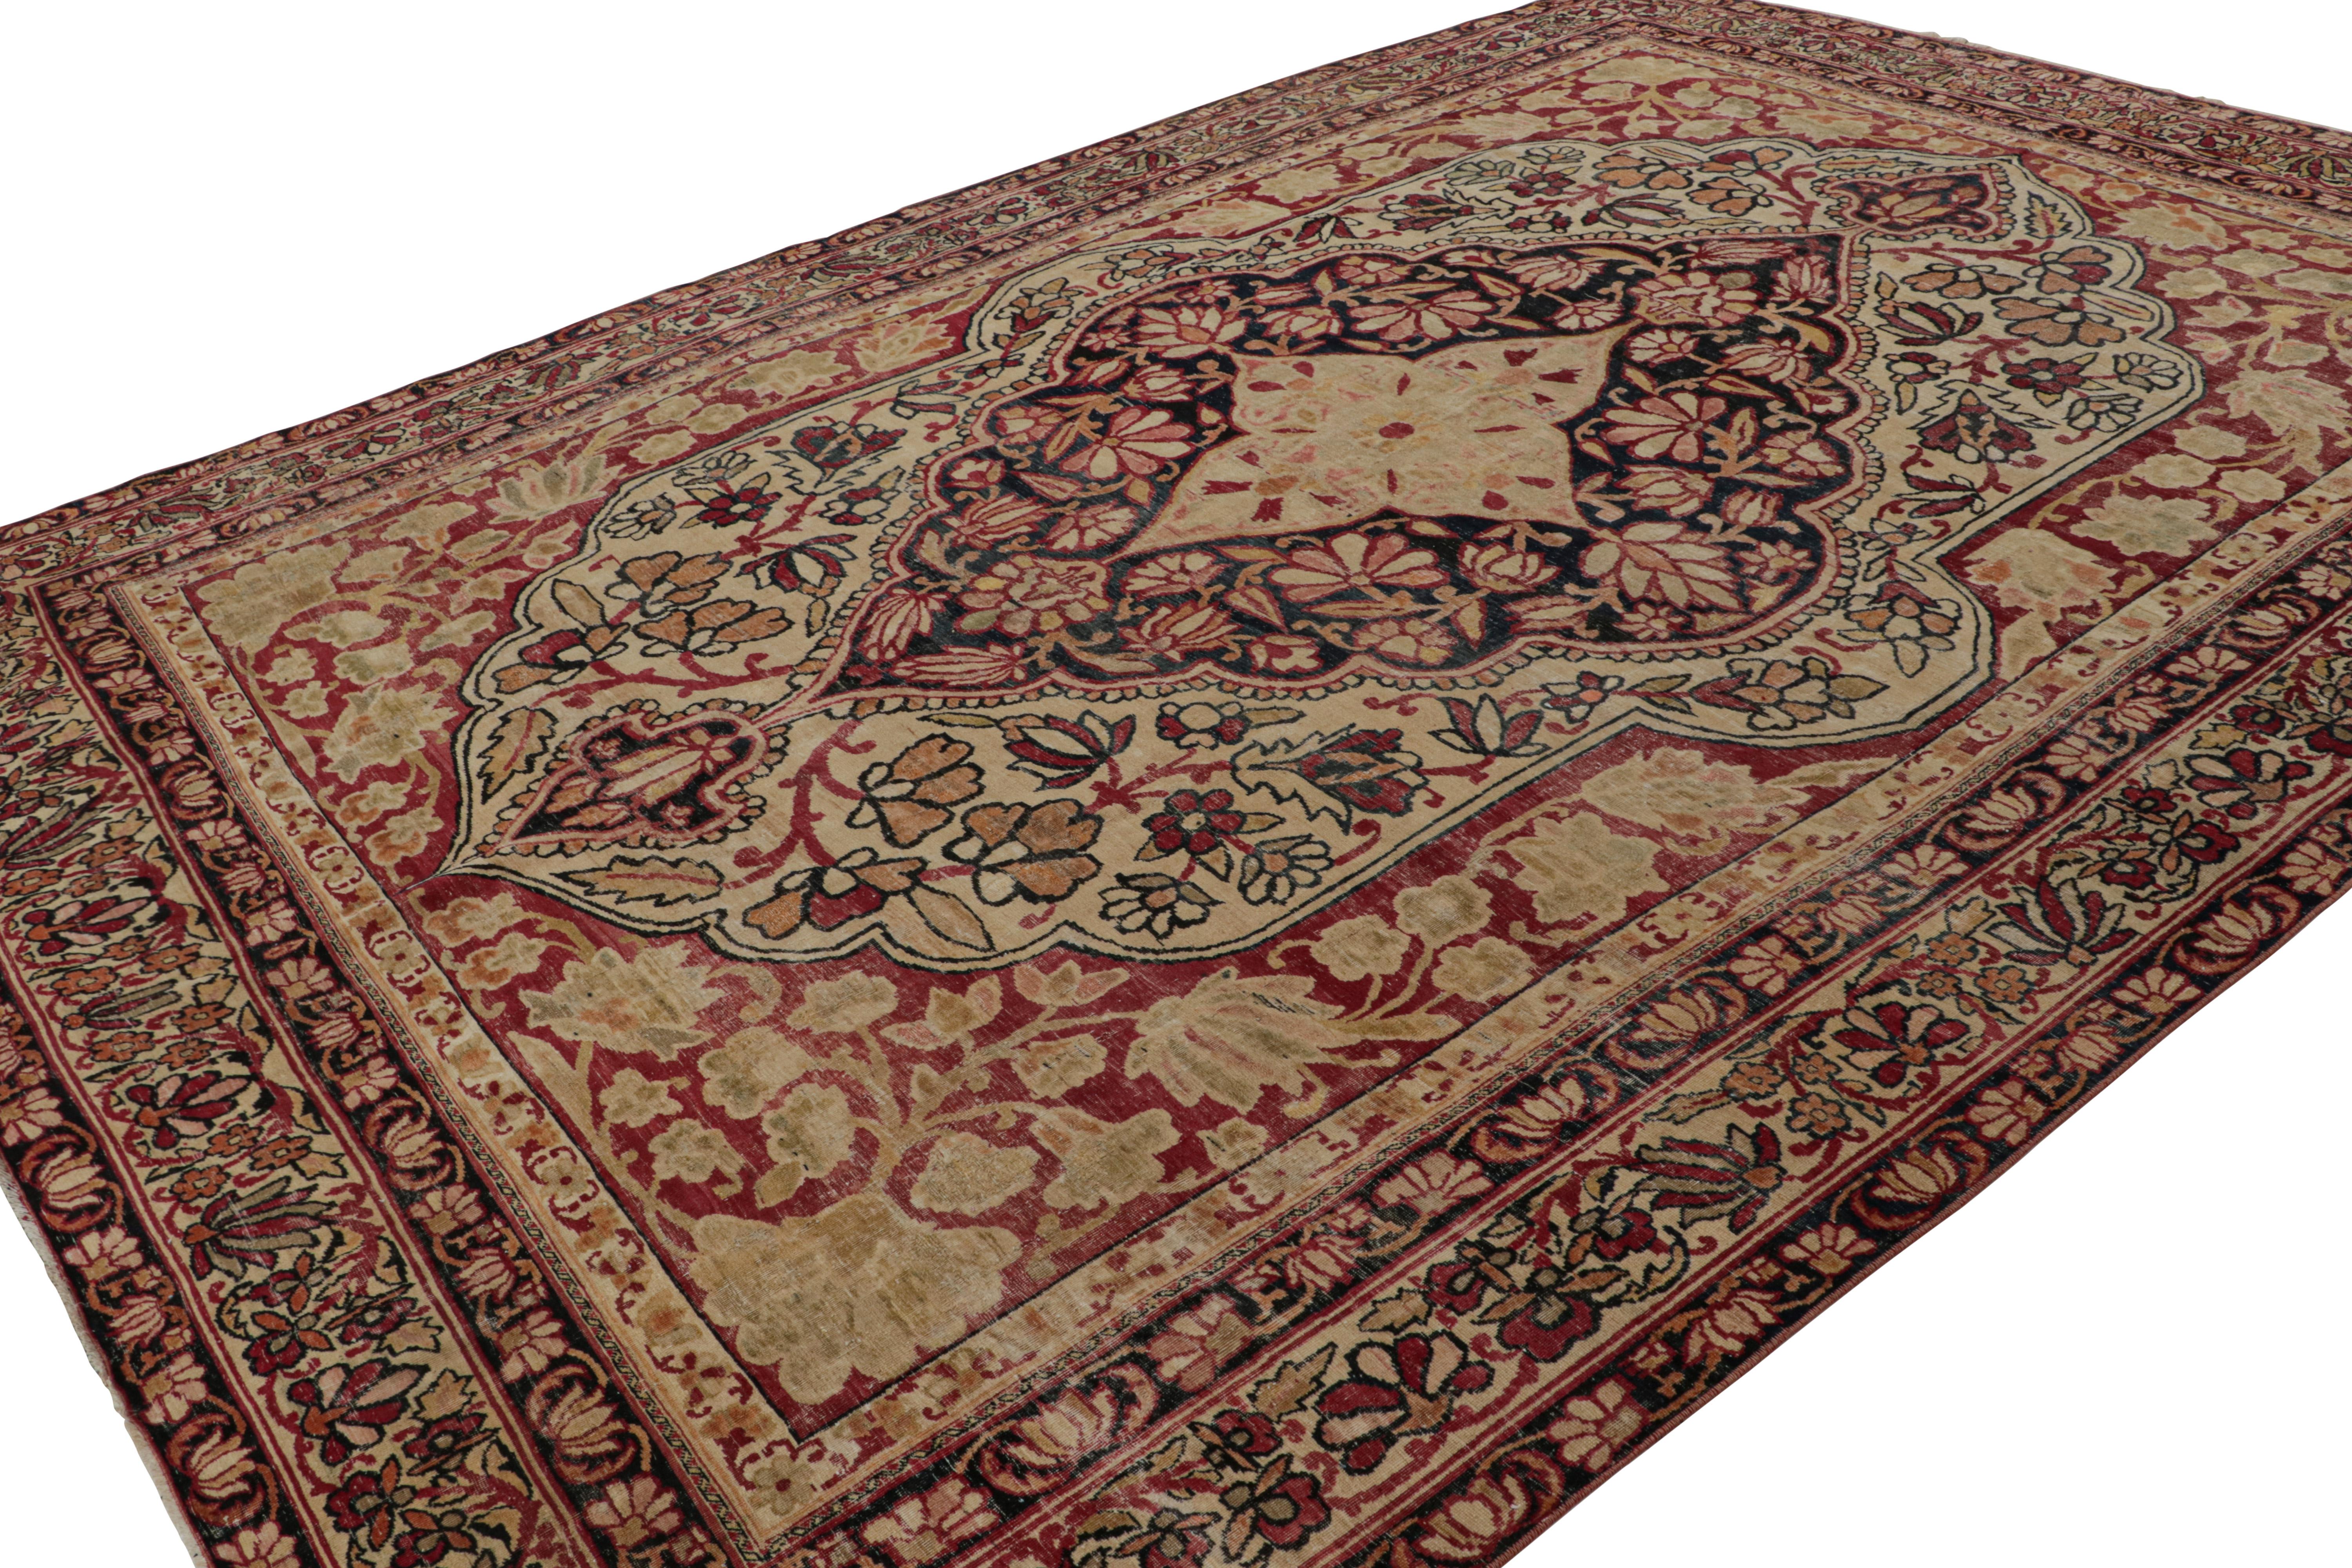 Handwoven in wool, this 15x23 antique Persian Kerman Lavar rug originating circa 1920-1930, is a masterpiece from one of the most sought-after weaving traditions in Persian city rugs. 

On the design: 

As regal as any Kerman Lavar rug, this